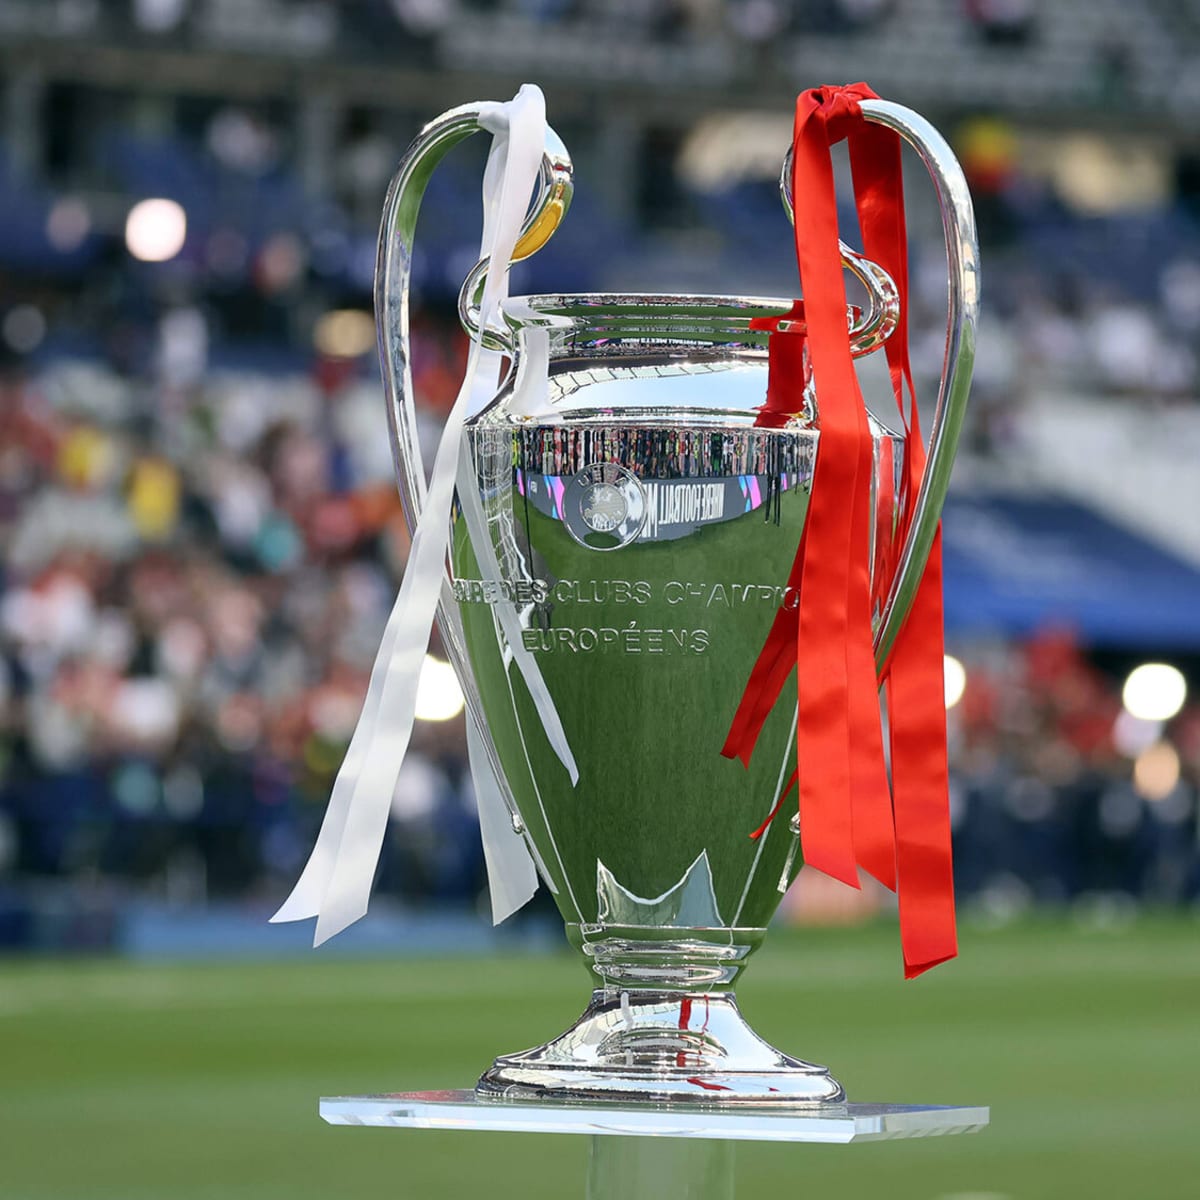 Champions League to resume on 7 August, UEFA Champions League